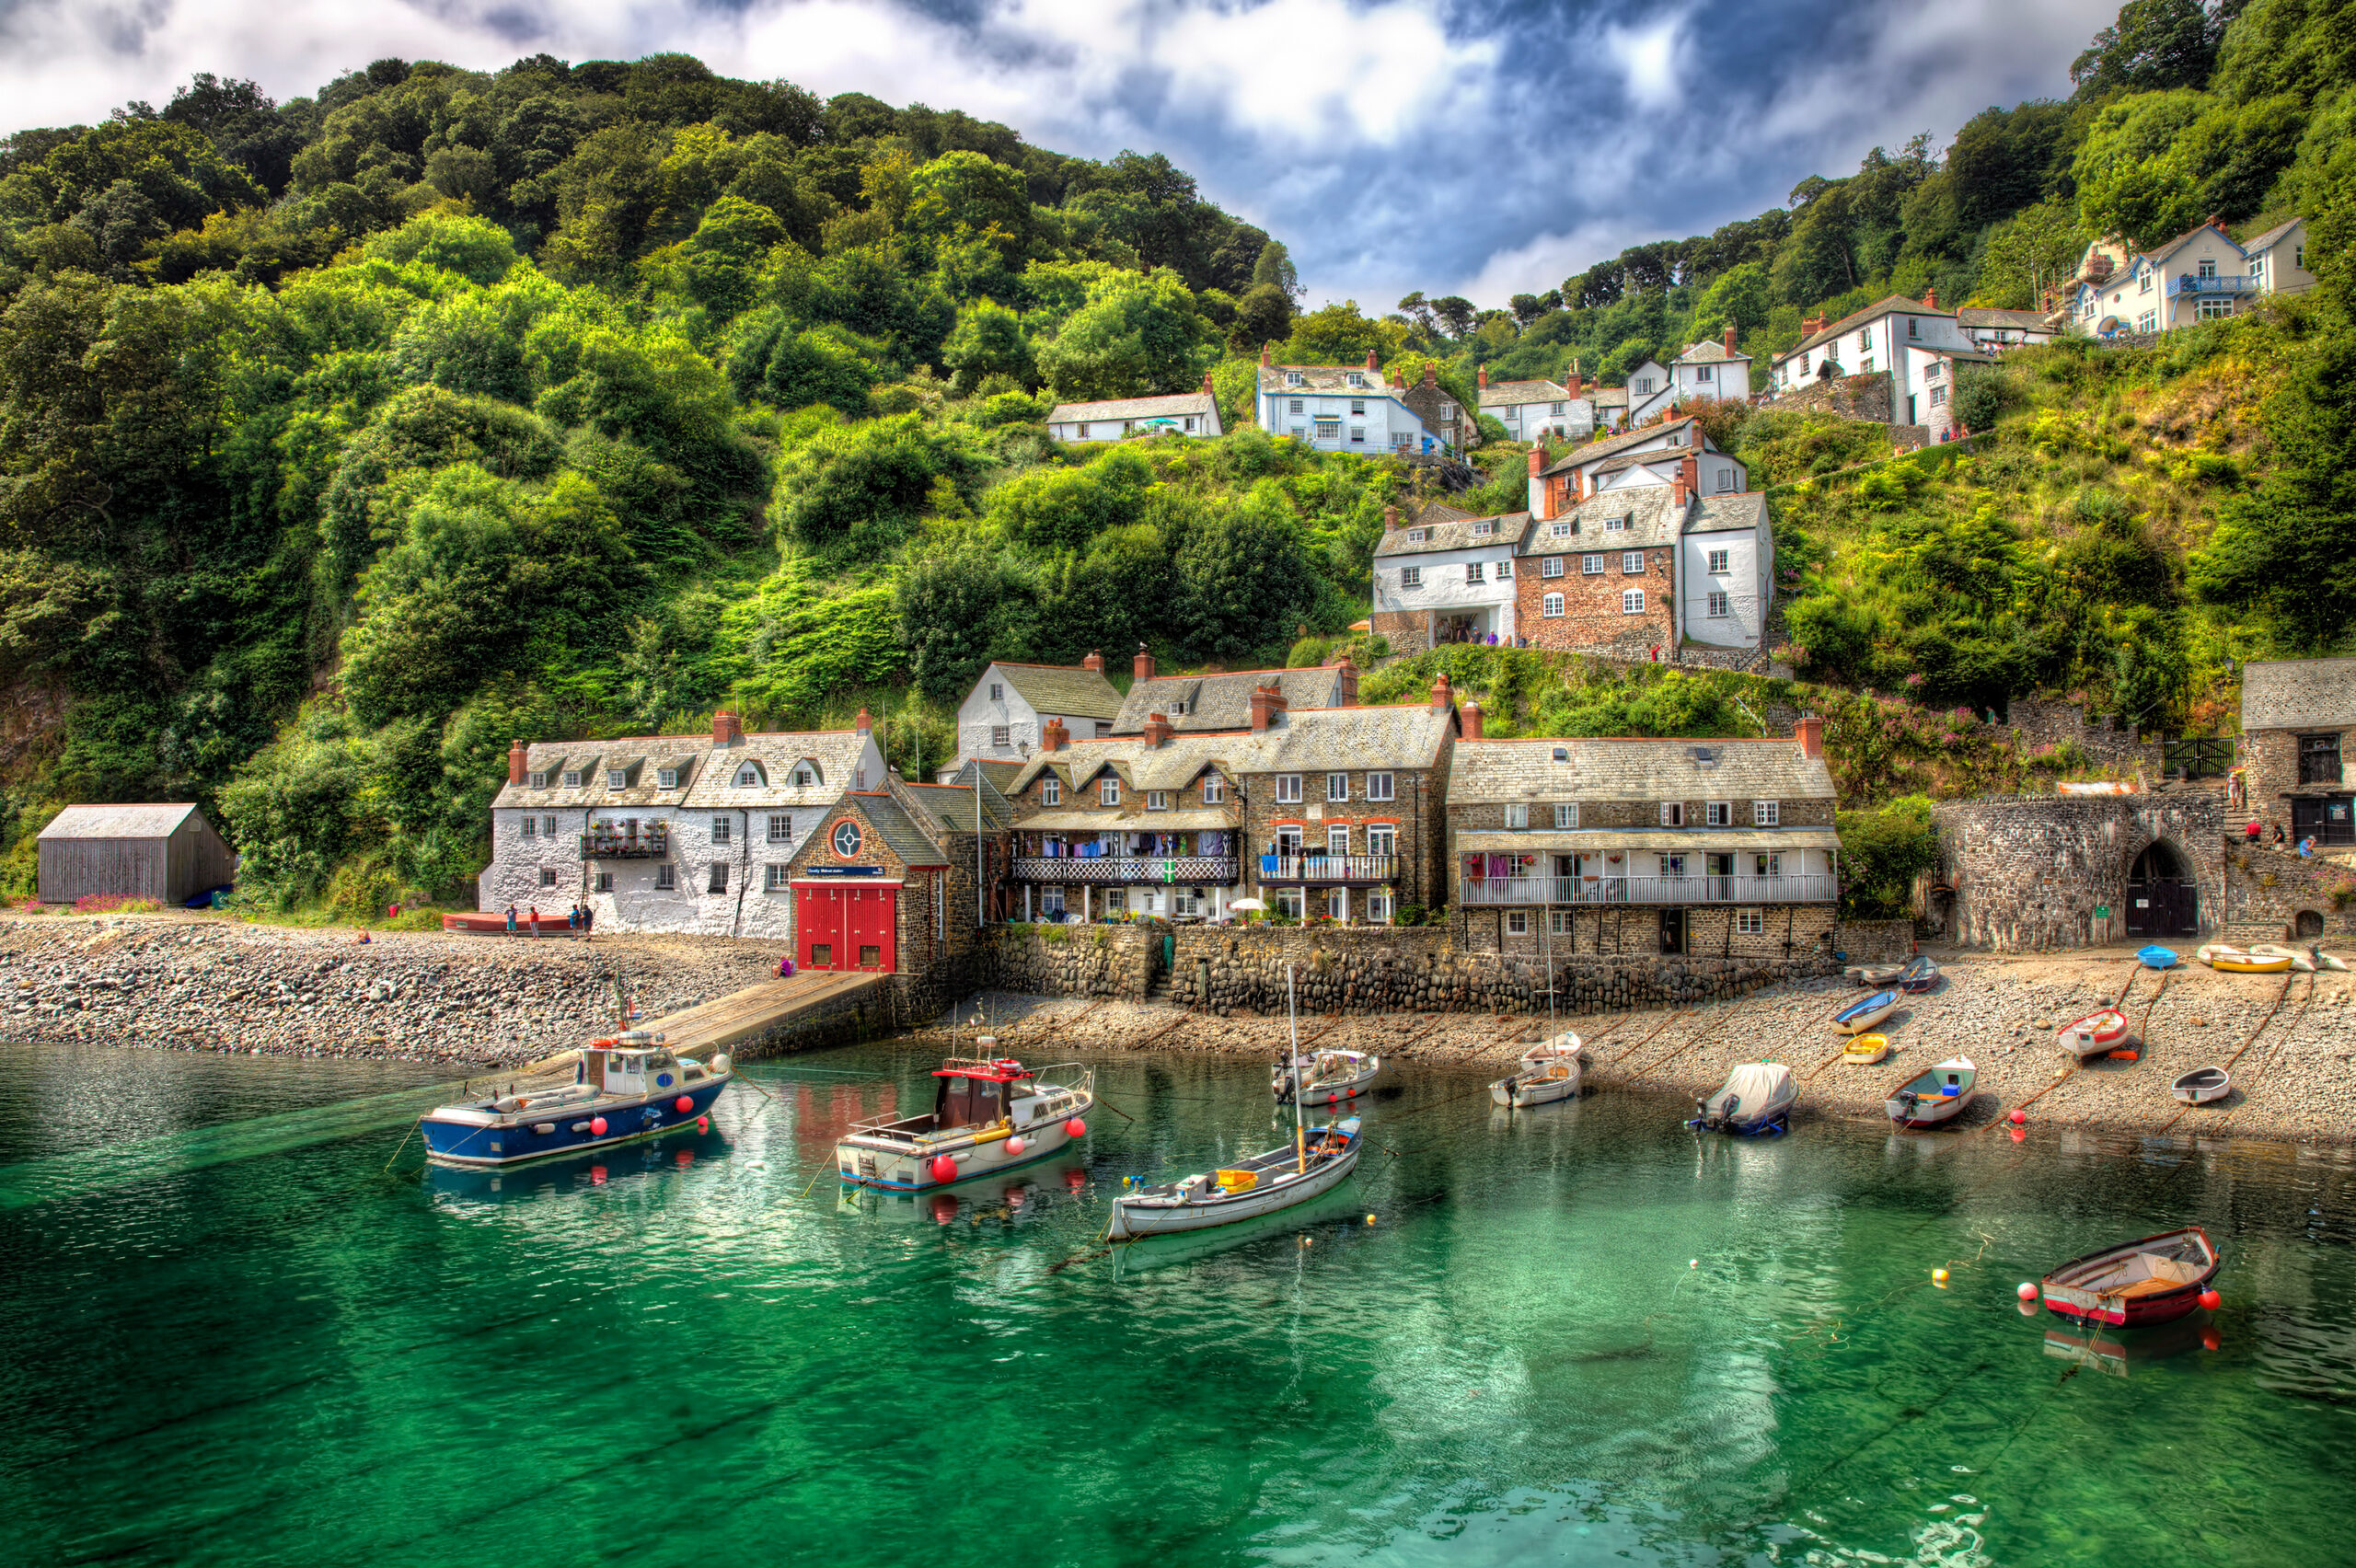 Photo taken from the Beautiful Fishing Port of Clovelly in Devon